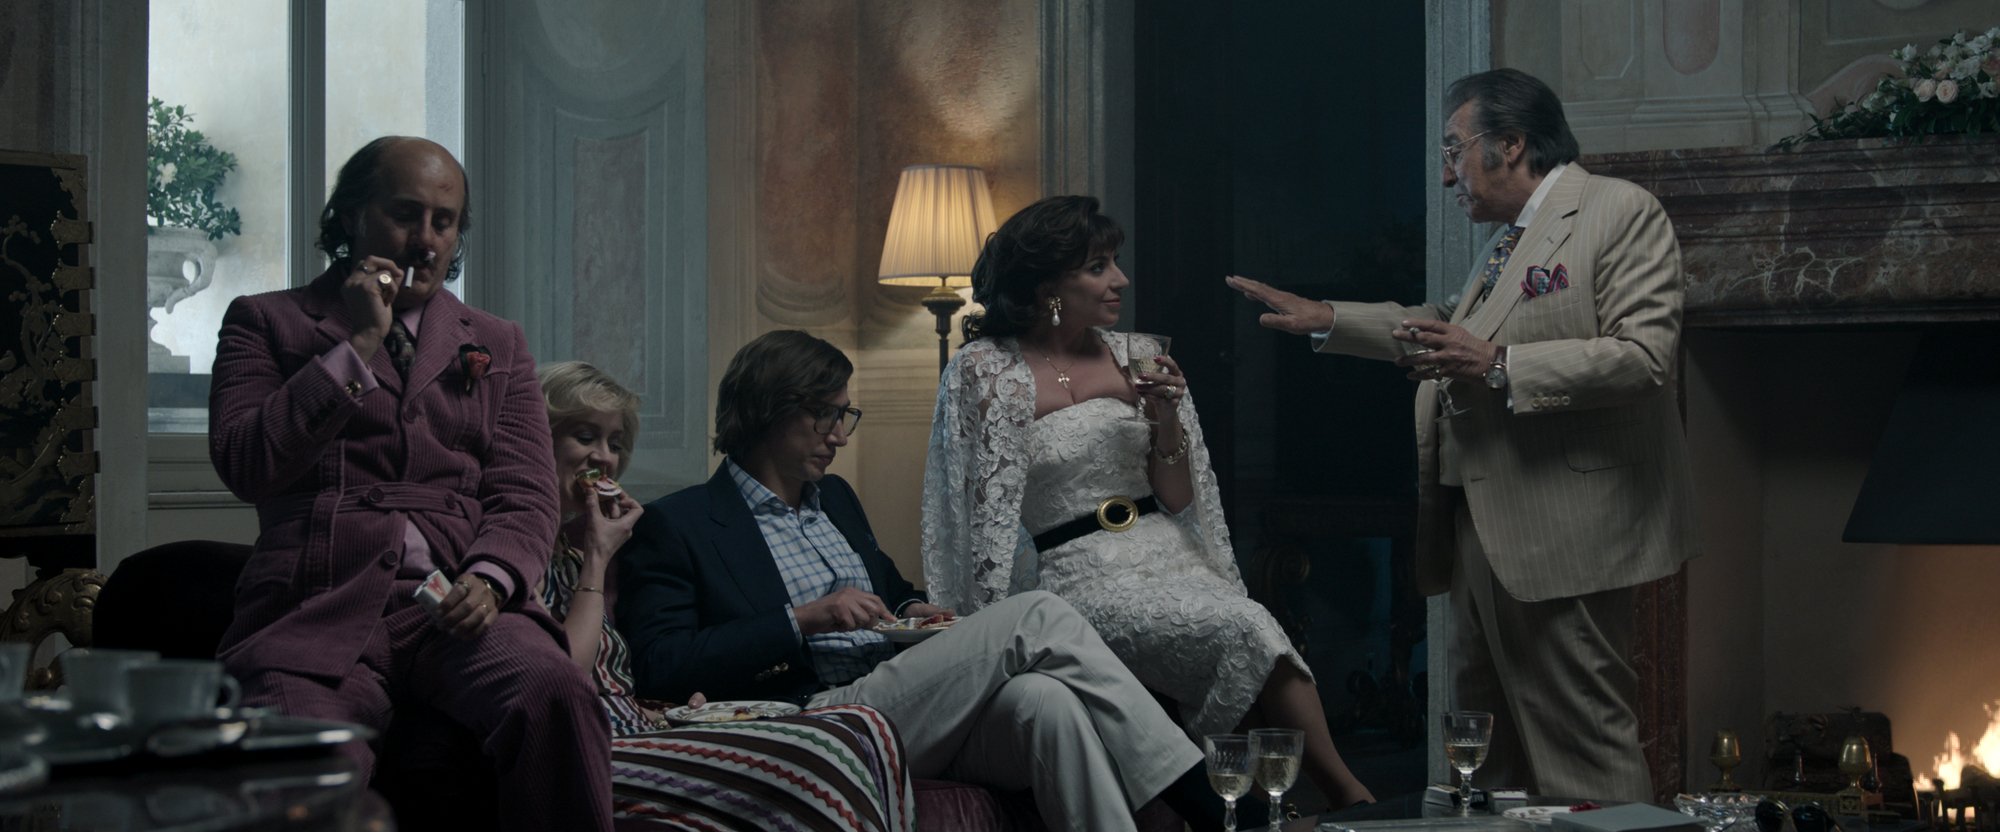 'House of Gucci' family members Jared Leto stars as Paolo Gucci, Florence Andrews as Jenny Gucci, Adam Driver as Maurizio Gucci, Lady Gaga as Patrizia Reggiani and Al Pacino as Aldo Gucci sitting around talking in front of the fireplace